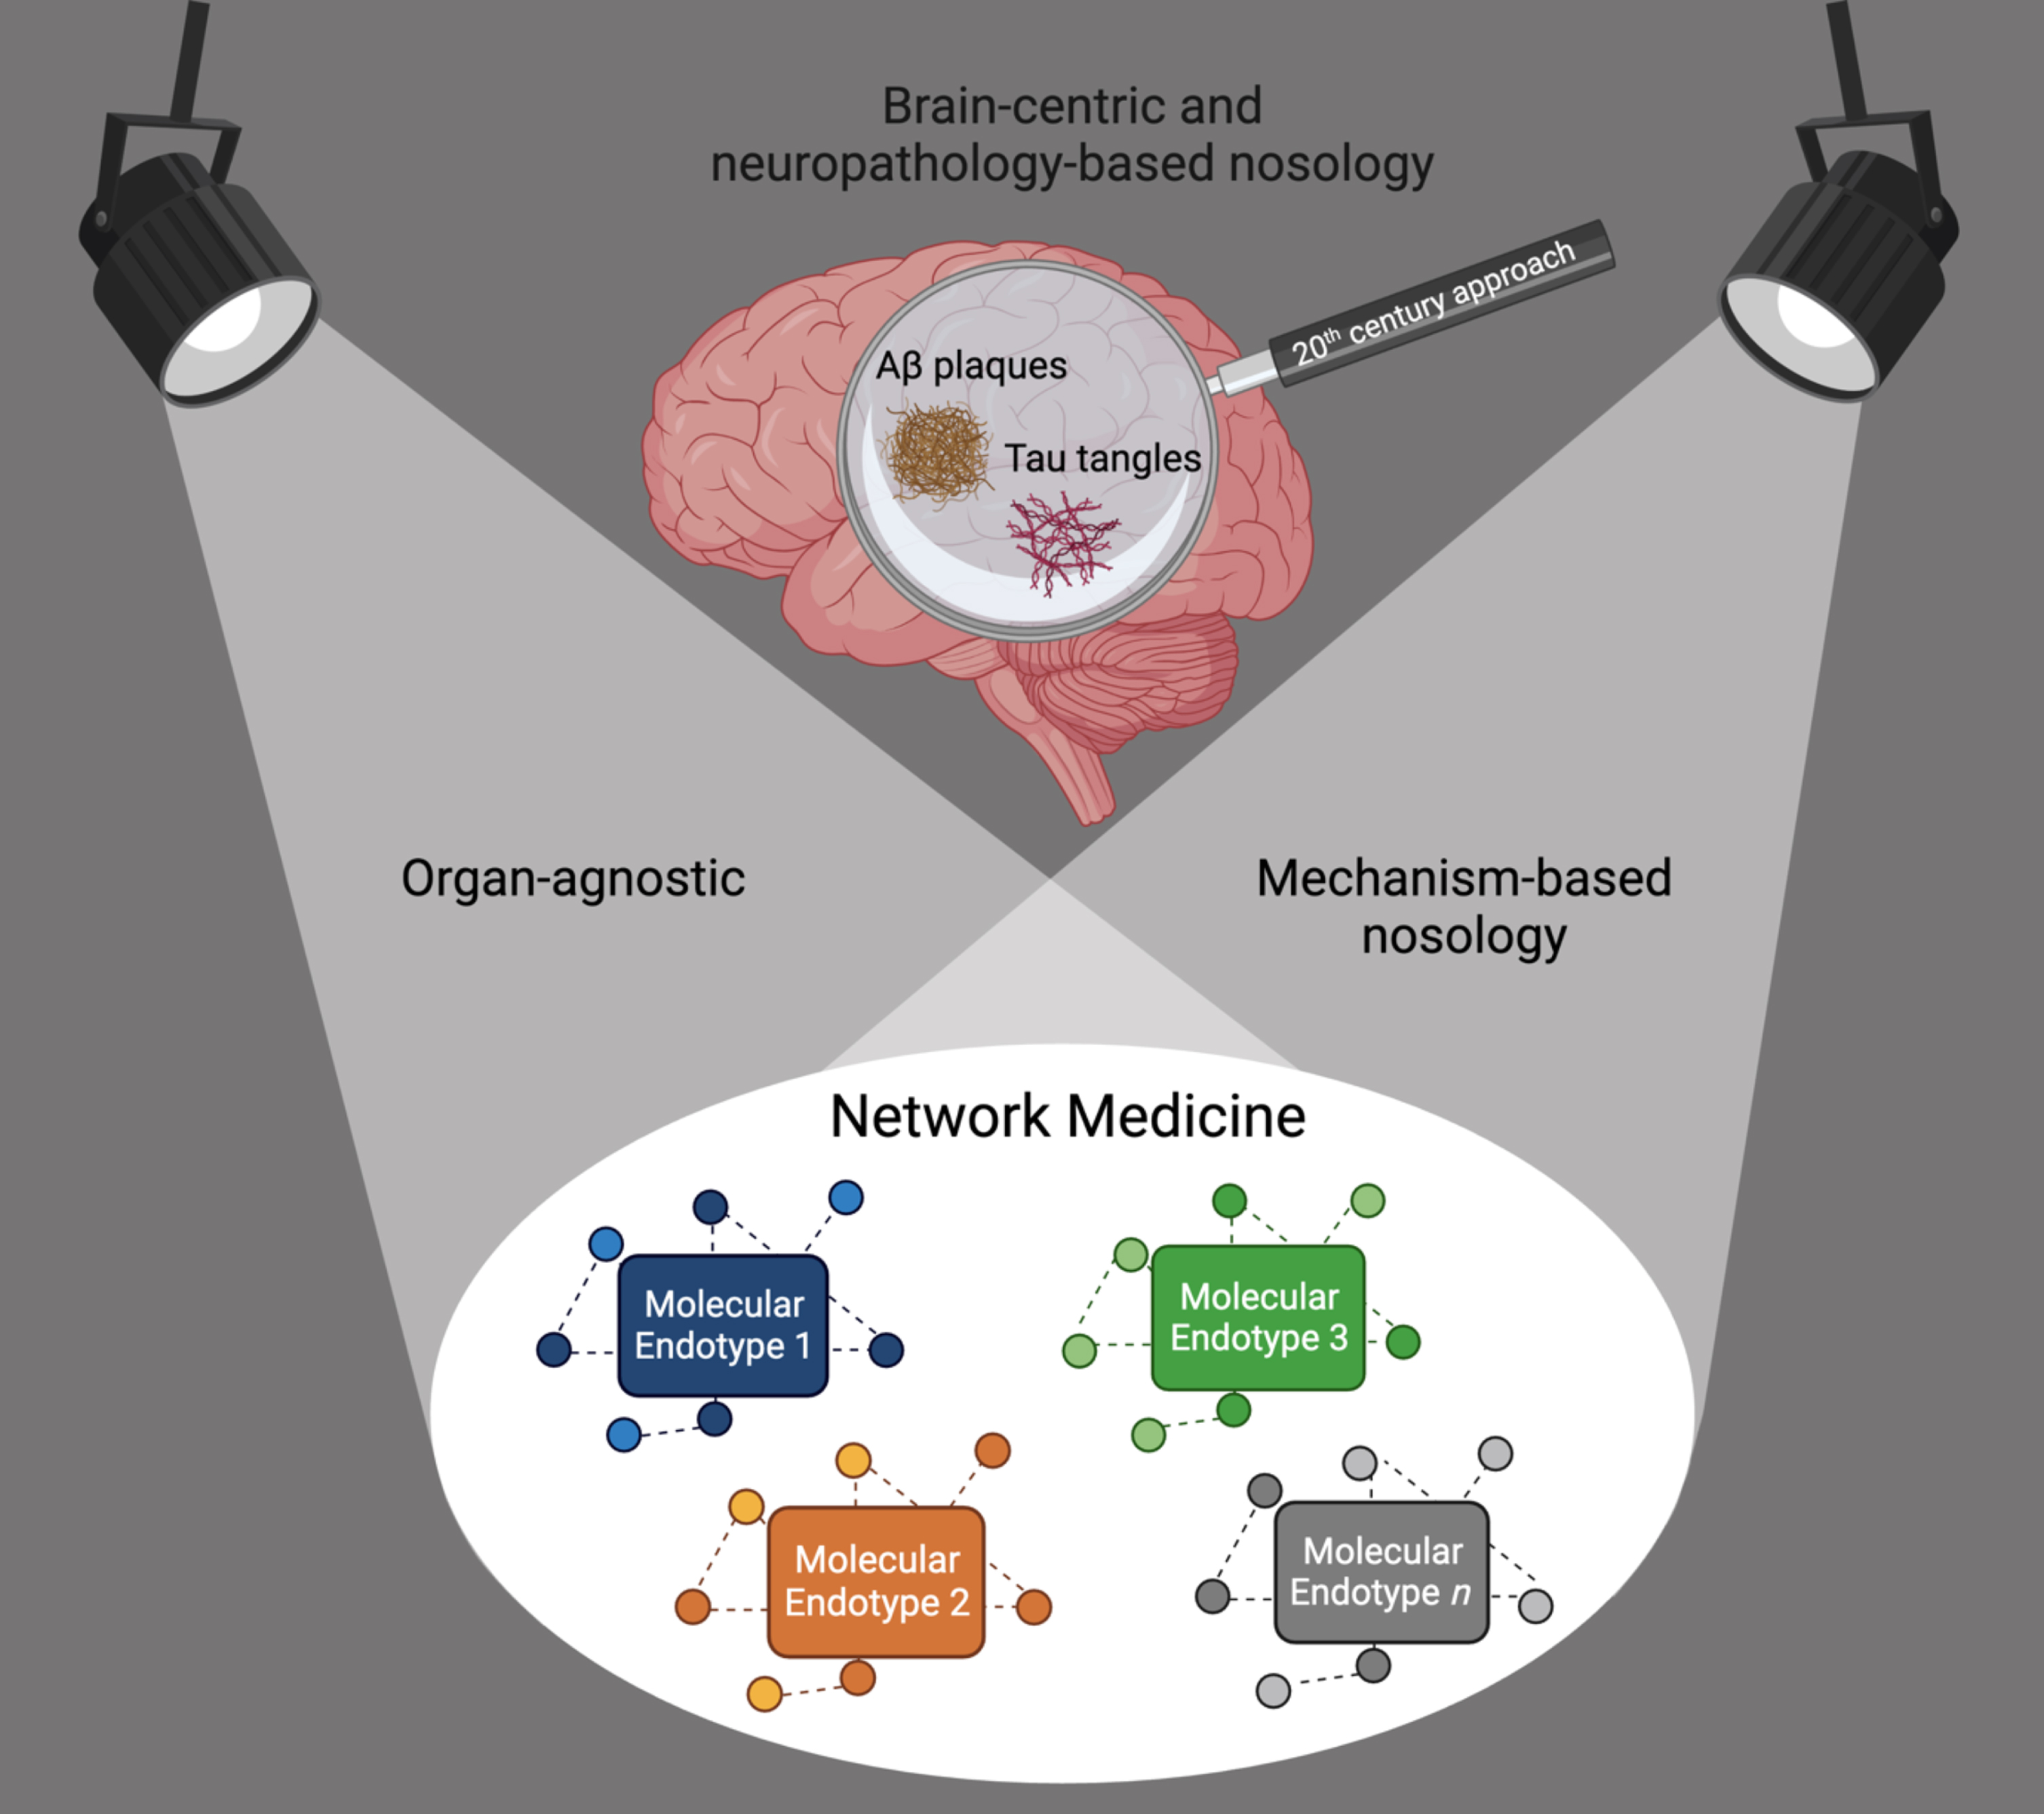 Shift from a brain-centric and neuropathology-based dementia nosology towards an organ-agnostic, mechanism-based nosology. Network Medicine accounts for causal heterogeneity and the identification of the molecular endotypes leading to the syndrome of dementia.